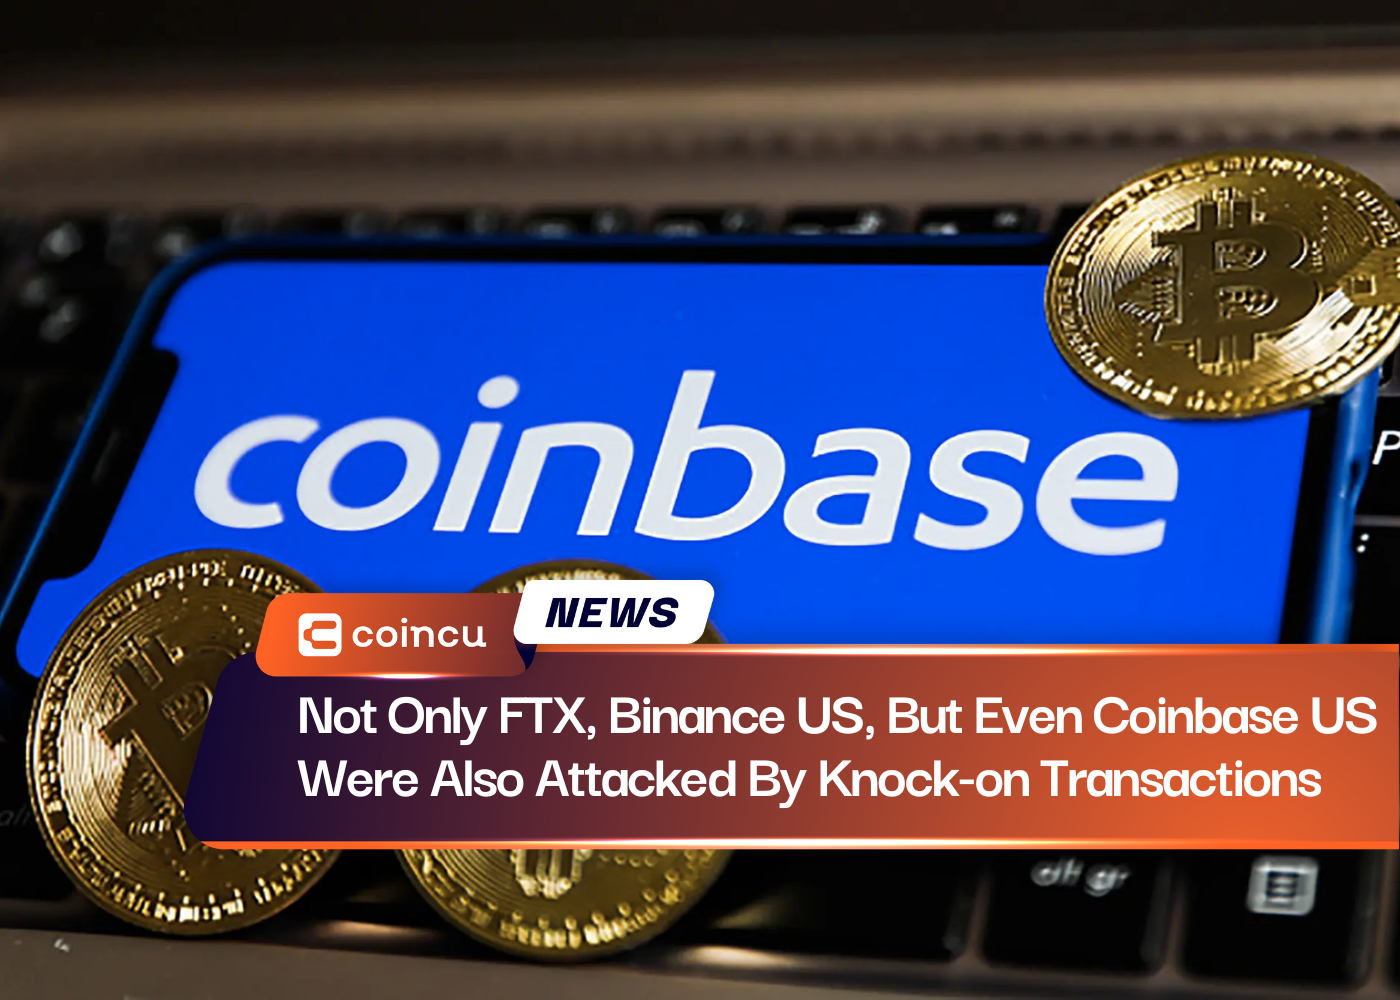 Not Only FTX, Binance US, But Even Coinbase US Were Also Attacked By Knock-on Transactions